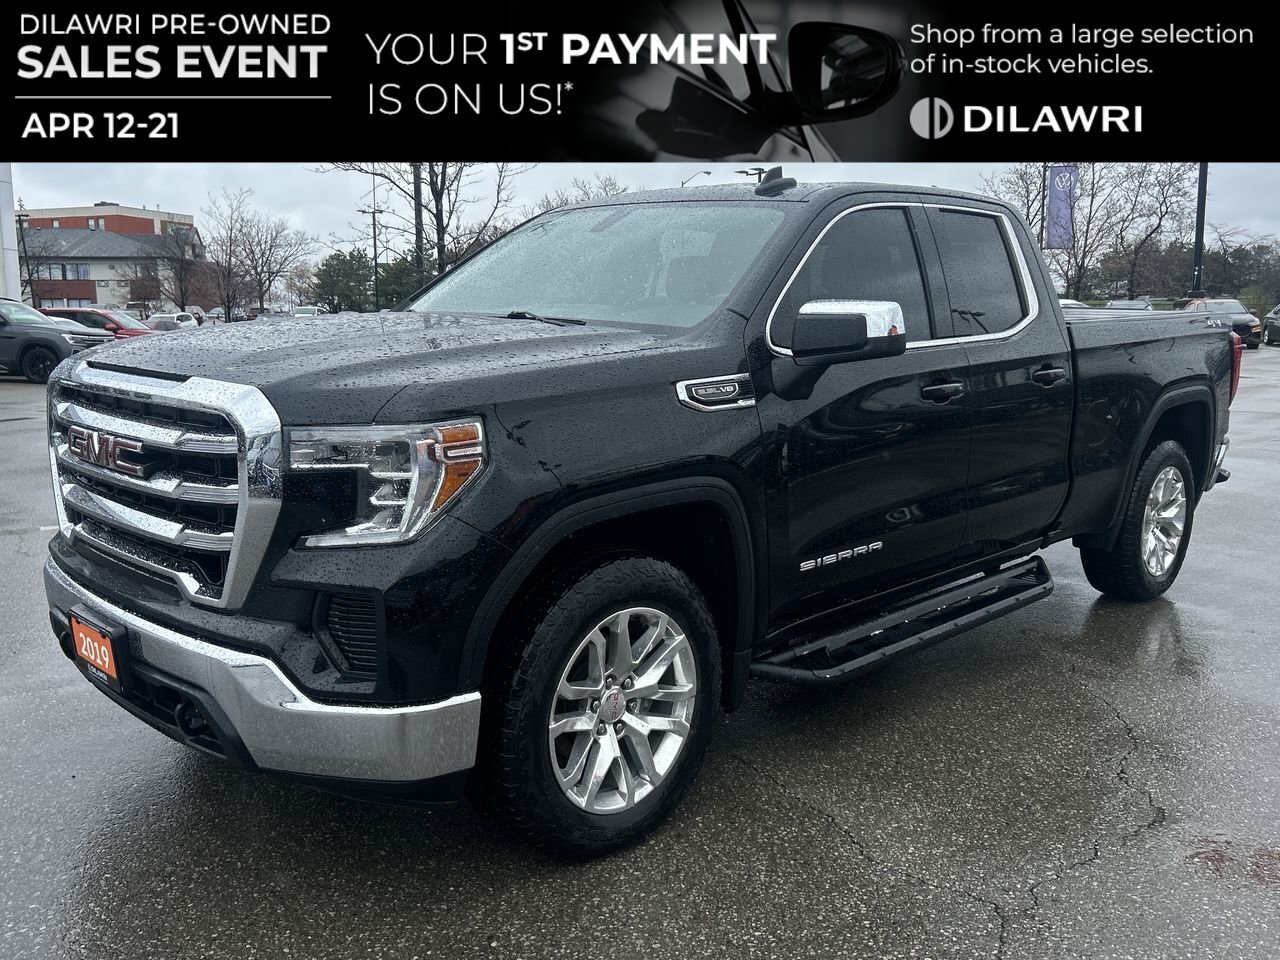 2019 GMC Sierra 1500 SLE One Owner| Clean Carfax| Winter Tires Included